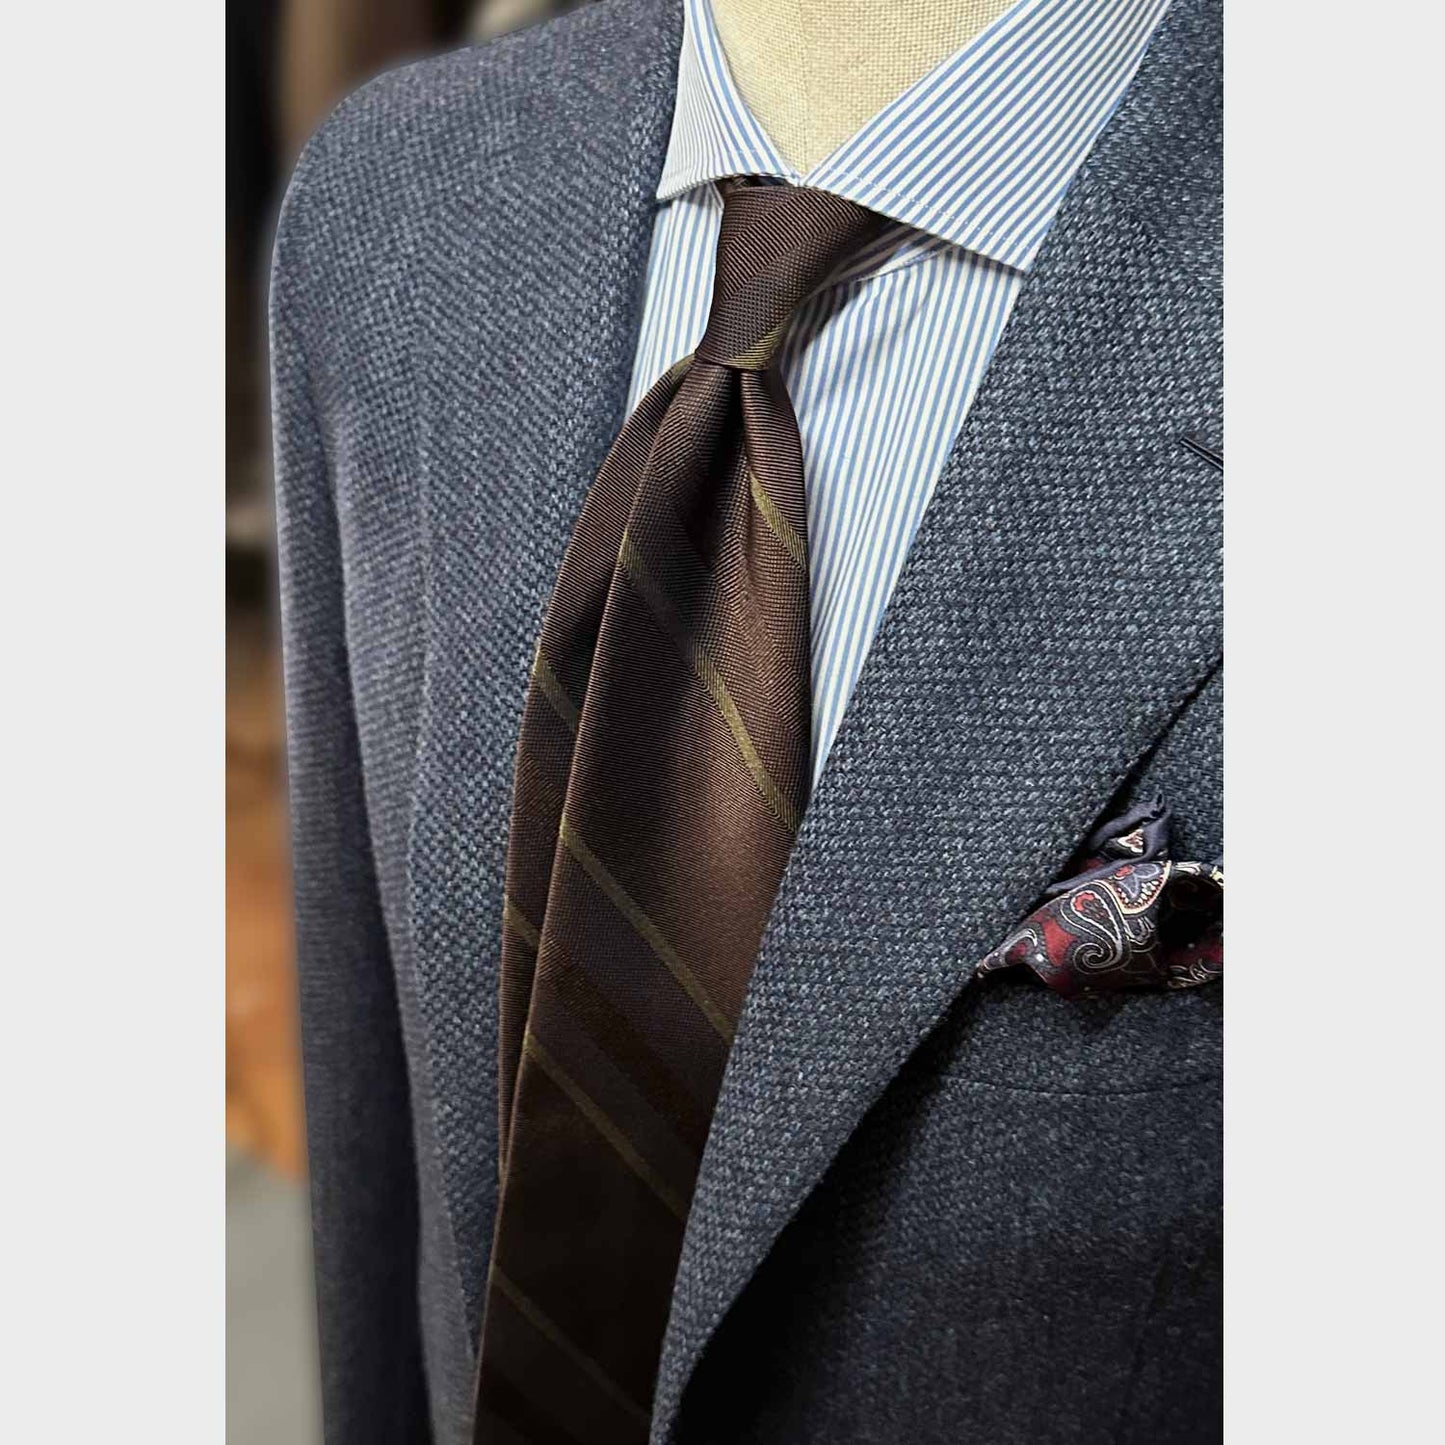 Load image into Gallery viewer, Wengè Brown Regimental Silk Tie. Elegant striped silk necktie, refined wengè brown background with army green striped, handmade in Italy by F.Marino Napoli
